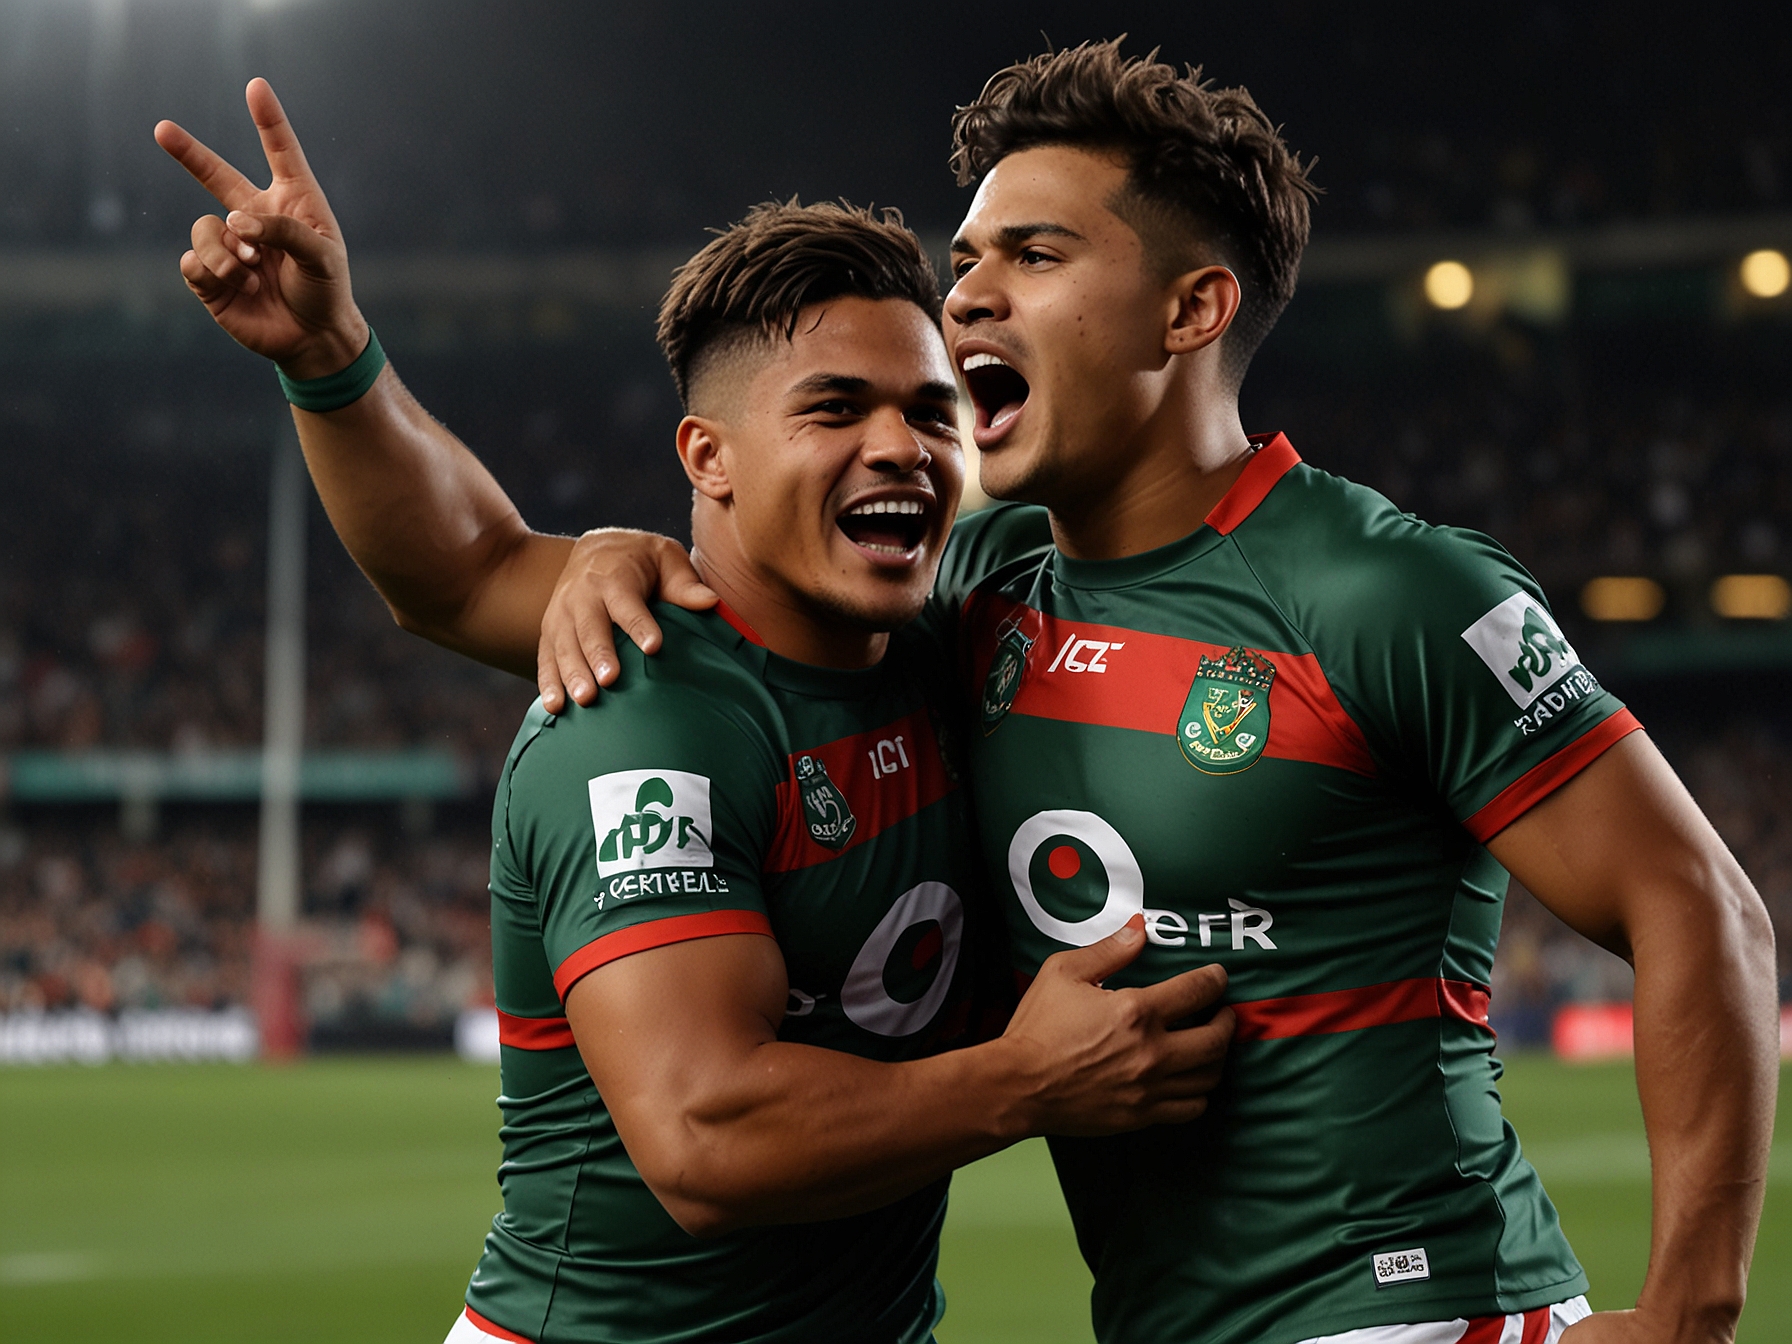 Image of South Sydney Rabbitohs players Latrell Mitchell and Cameron Murray celebrating a try, highlighting their strong playmaking skills and leadership that boosts team morale.